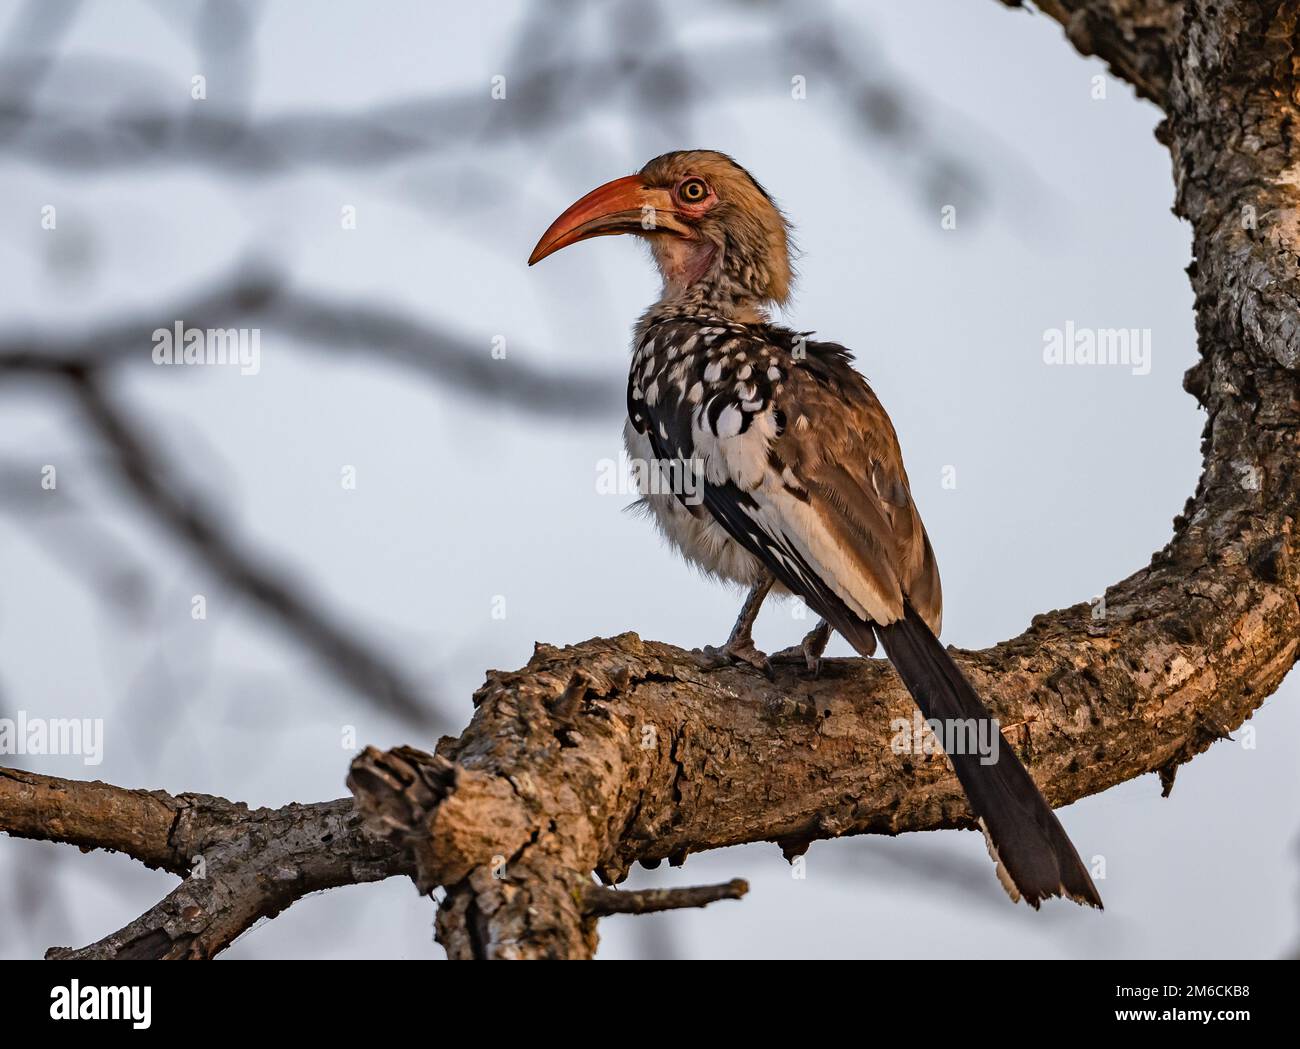 A Southern Red-billed Hornbill (Tockus rufirostris) perched on a tree. Kruger National Park, South Africa. Stock Photo